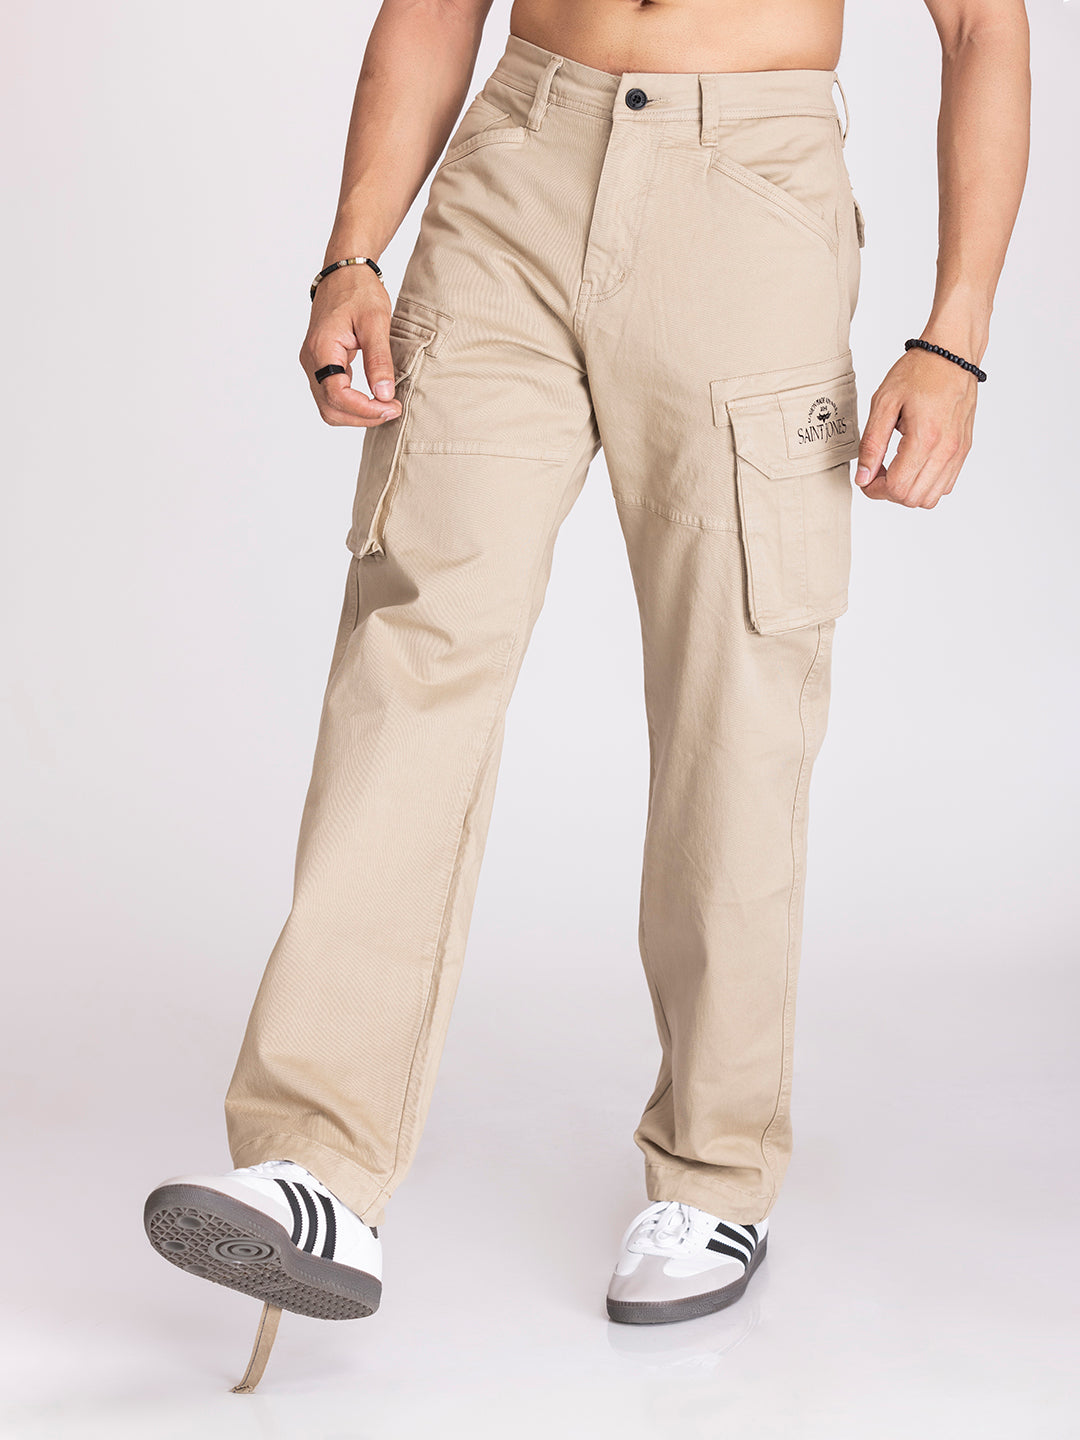 Buy RUFF Boys 6 Pocket Solid Cargo Pants | Shoppers Stop